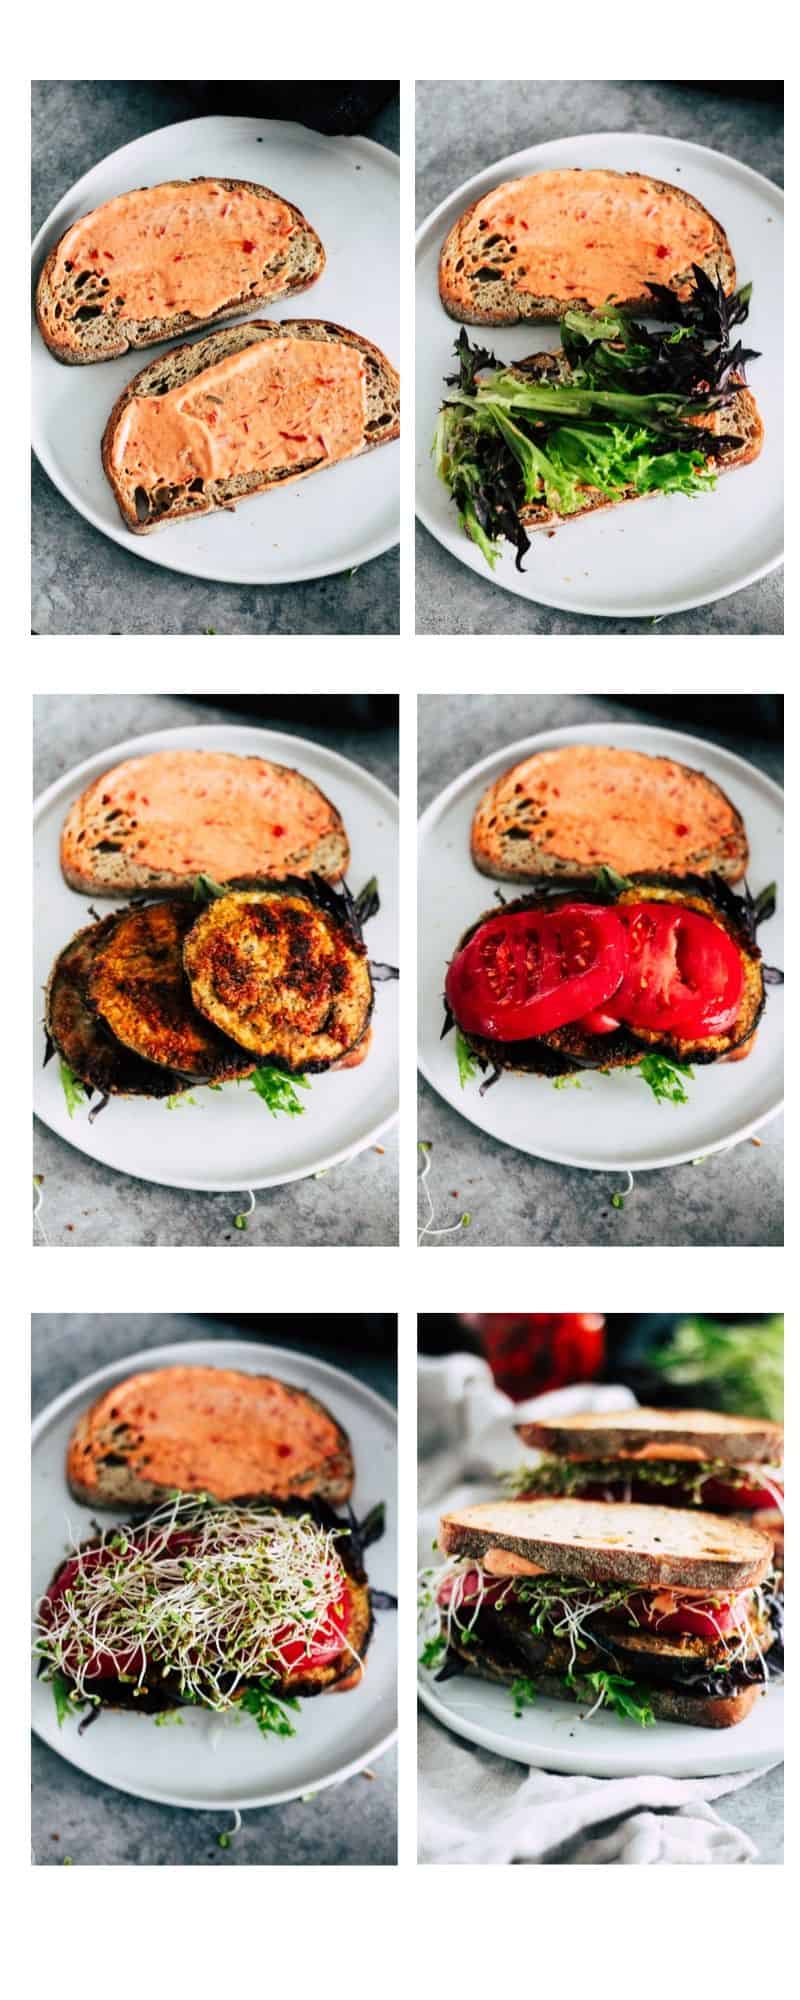 Step-by-step picture tutorial for how to make a vegetarian eggplant BLT.